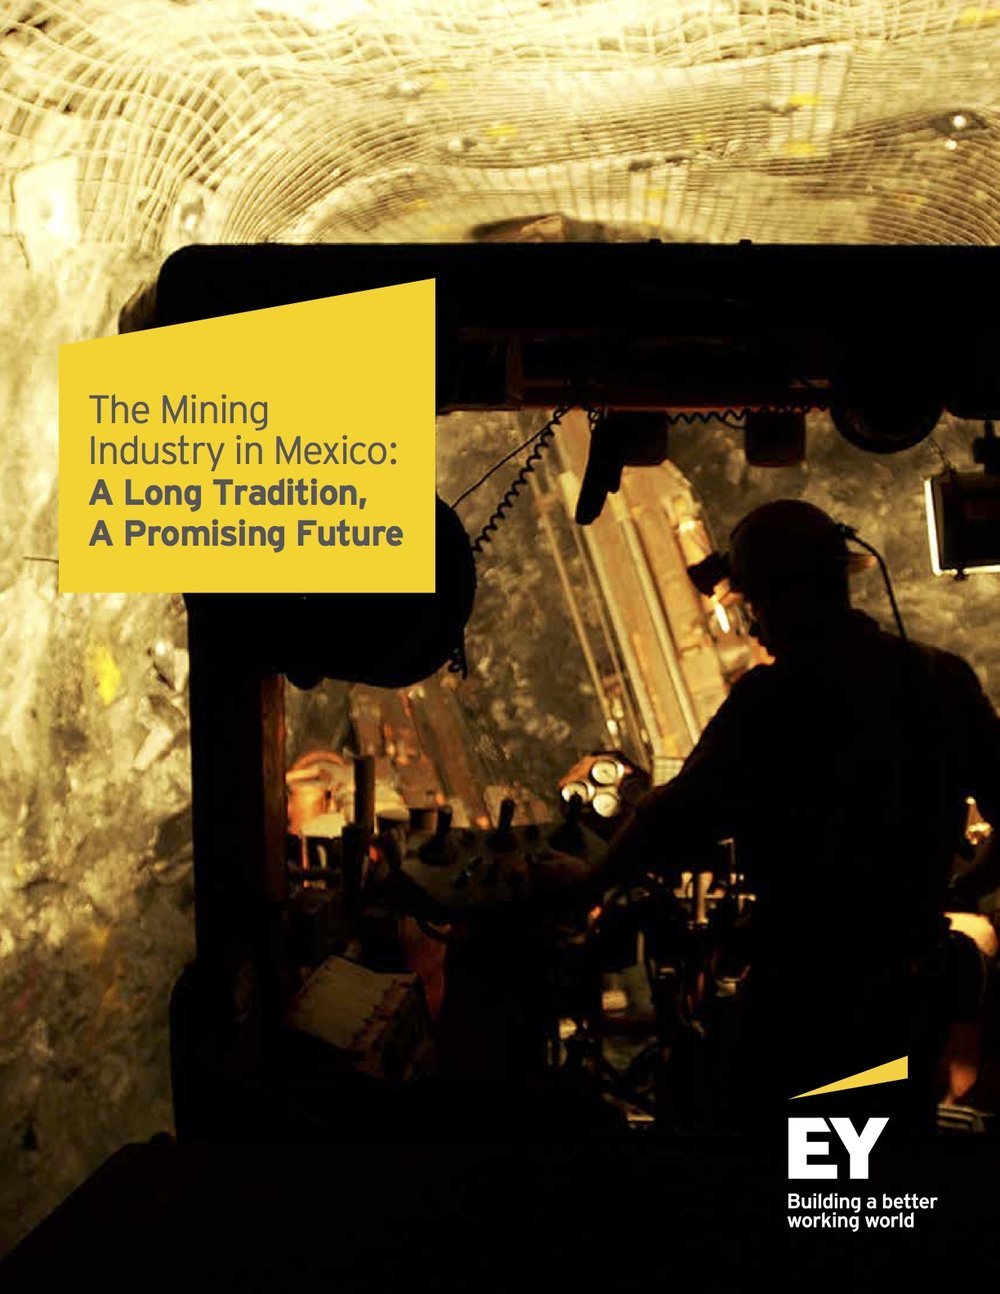 ey-the-mining-industry-in-mexico-01.jpg